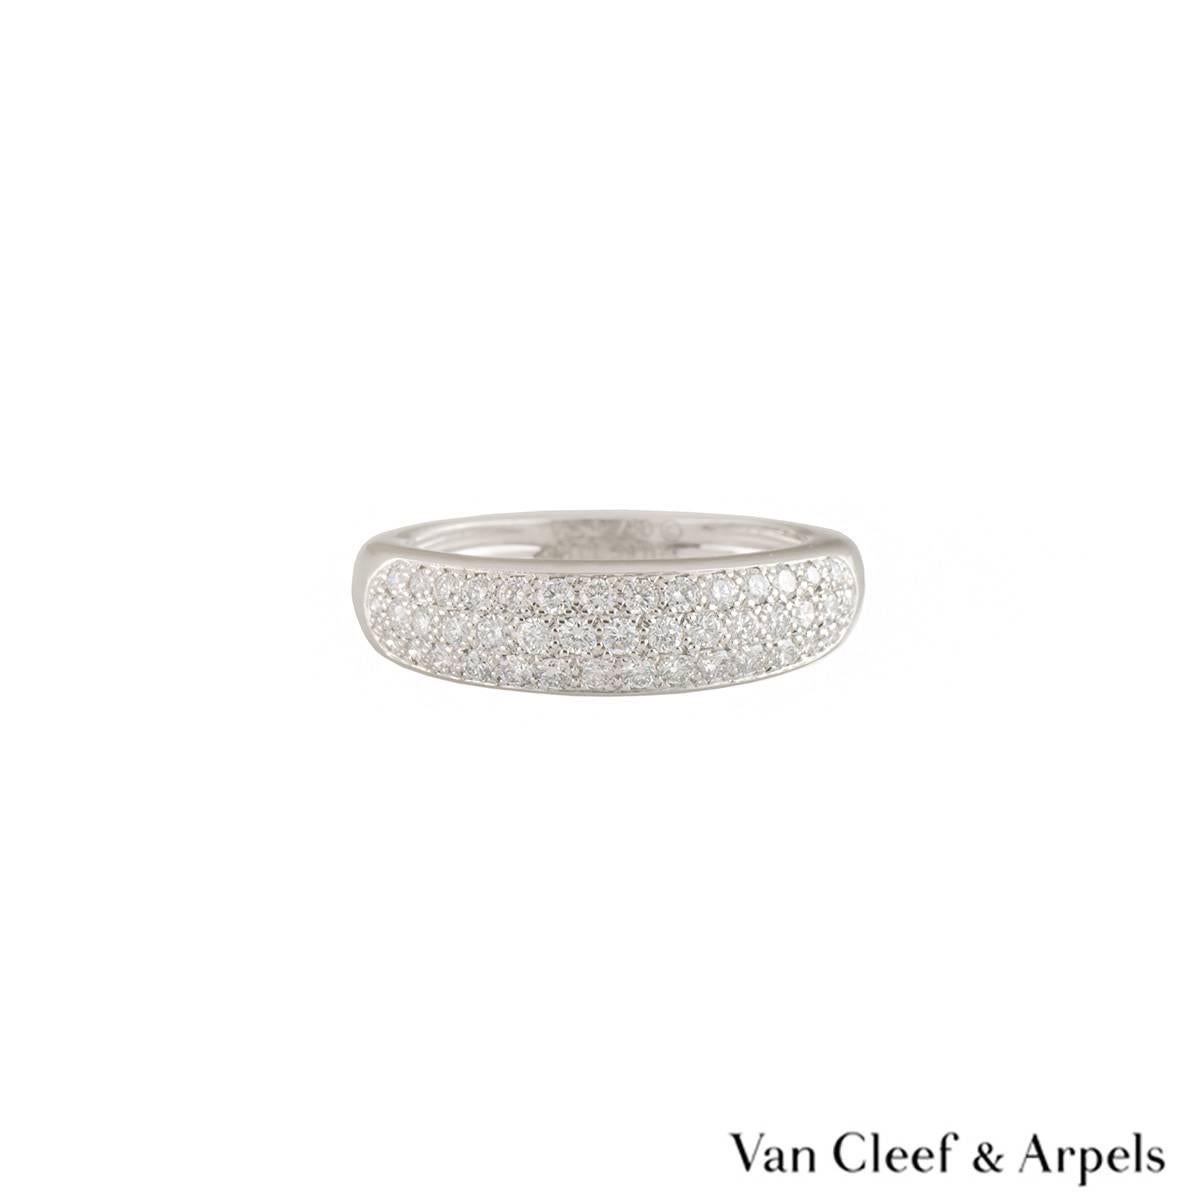 A sparkly 18k white gold diamond Van Cleef & Arpels ring. The ring comprises of 3 rows of round brilliant cut diamonds in a pave setting, with a total weight of approximately 0.56ct, predominantly F colour and VS+ clarity. The ring is a size UK I½/